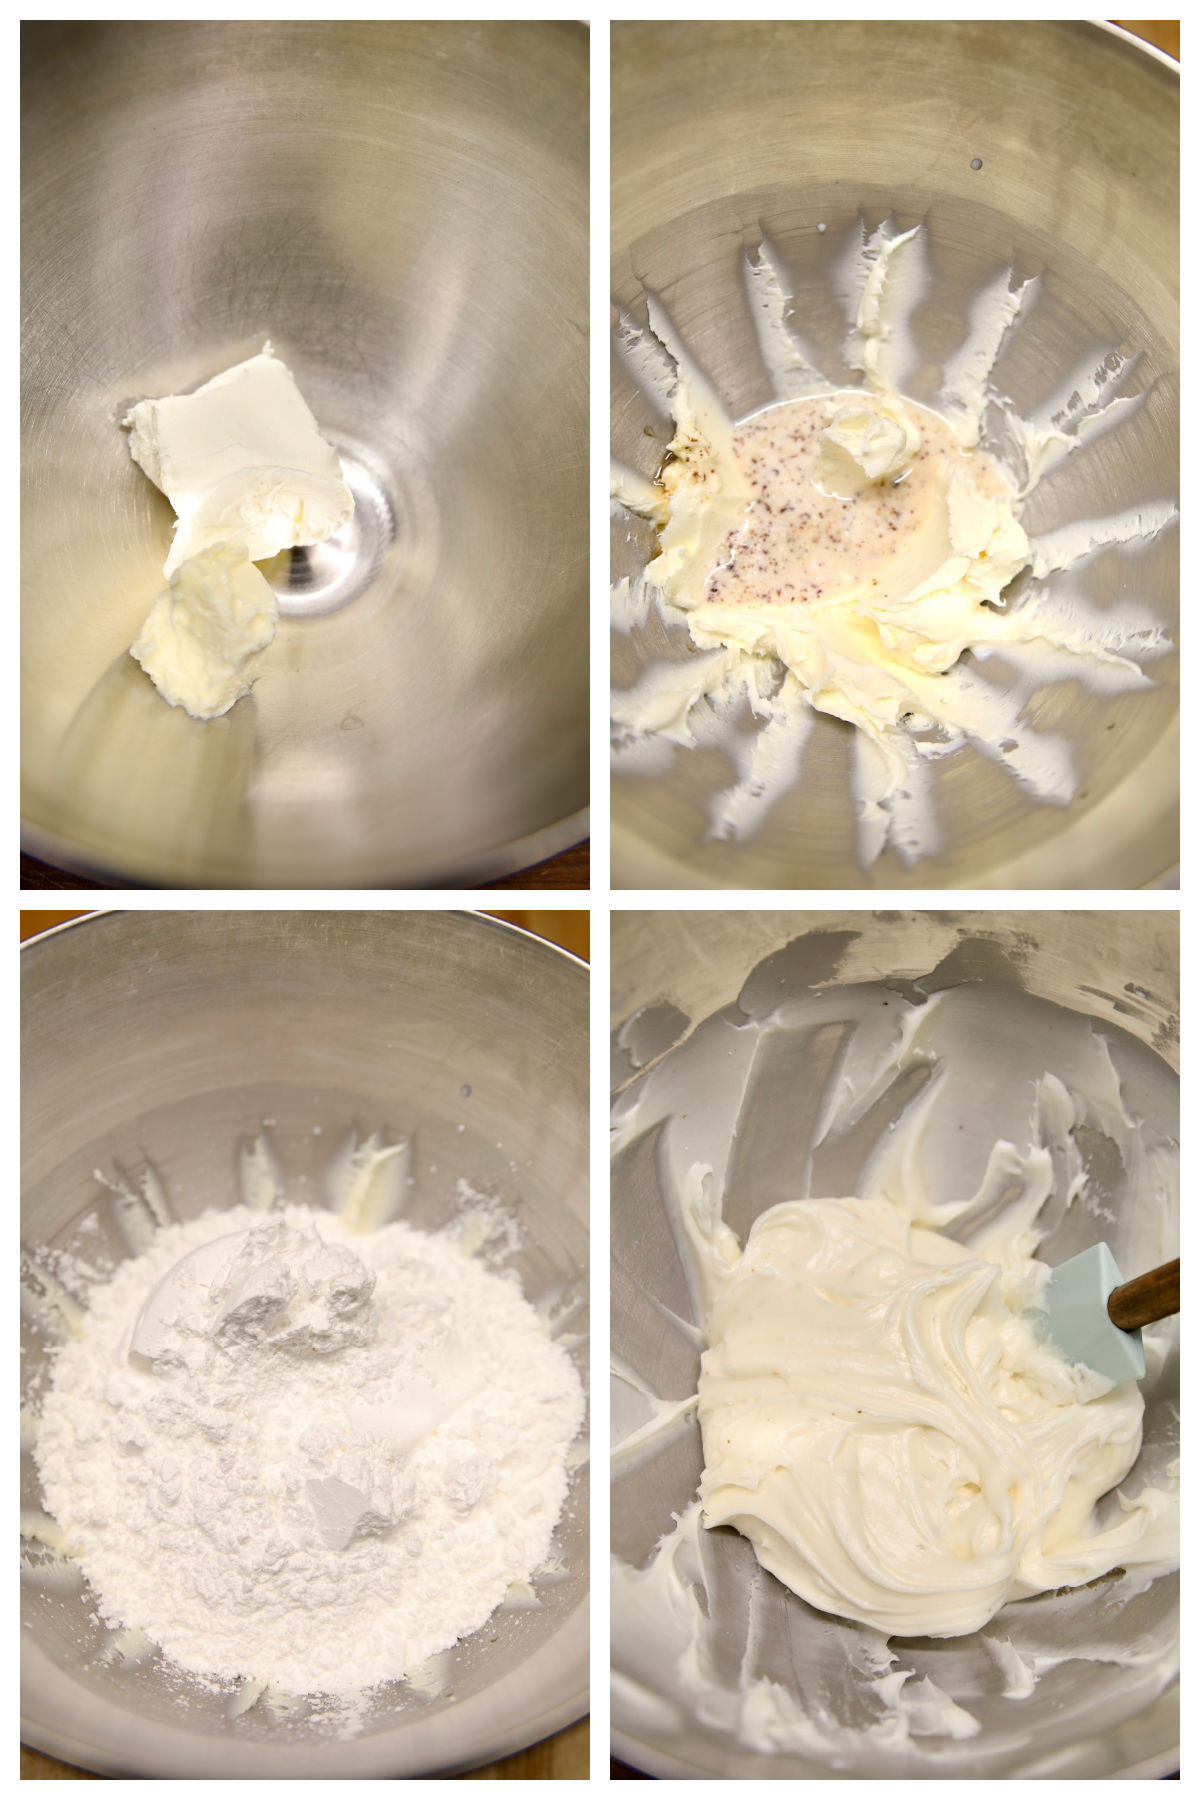 Collage making cream cheese icing.